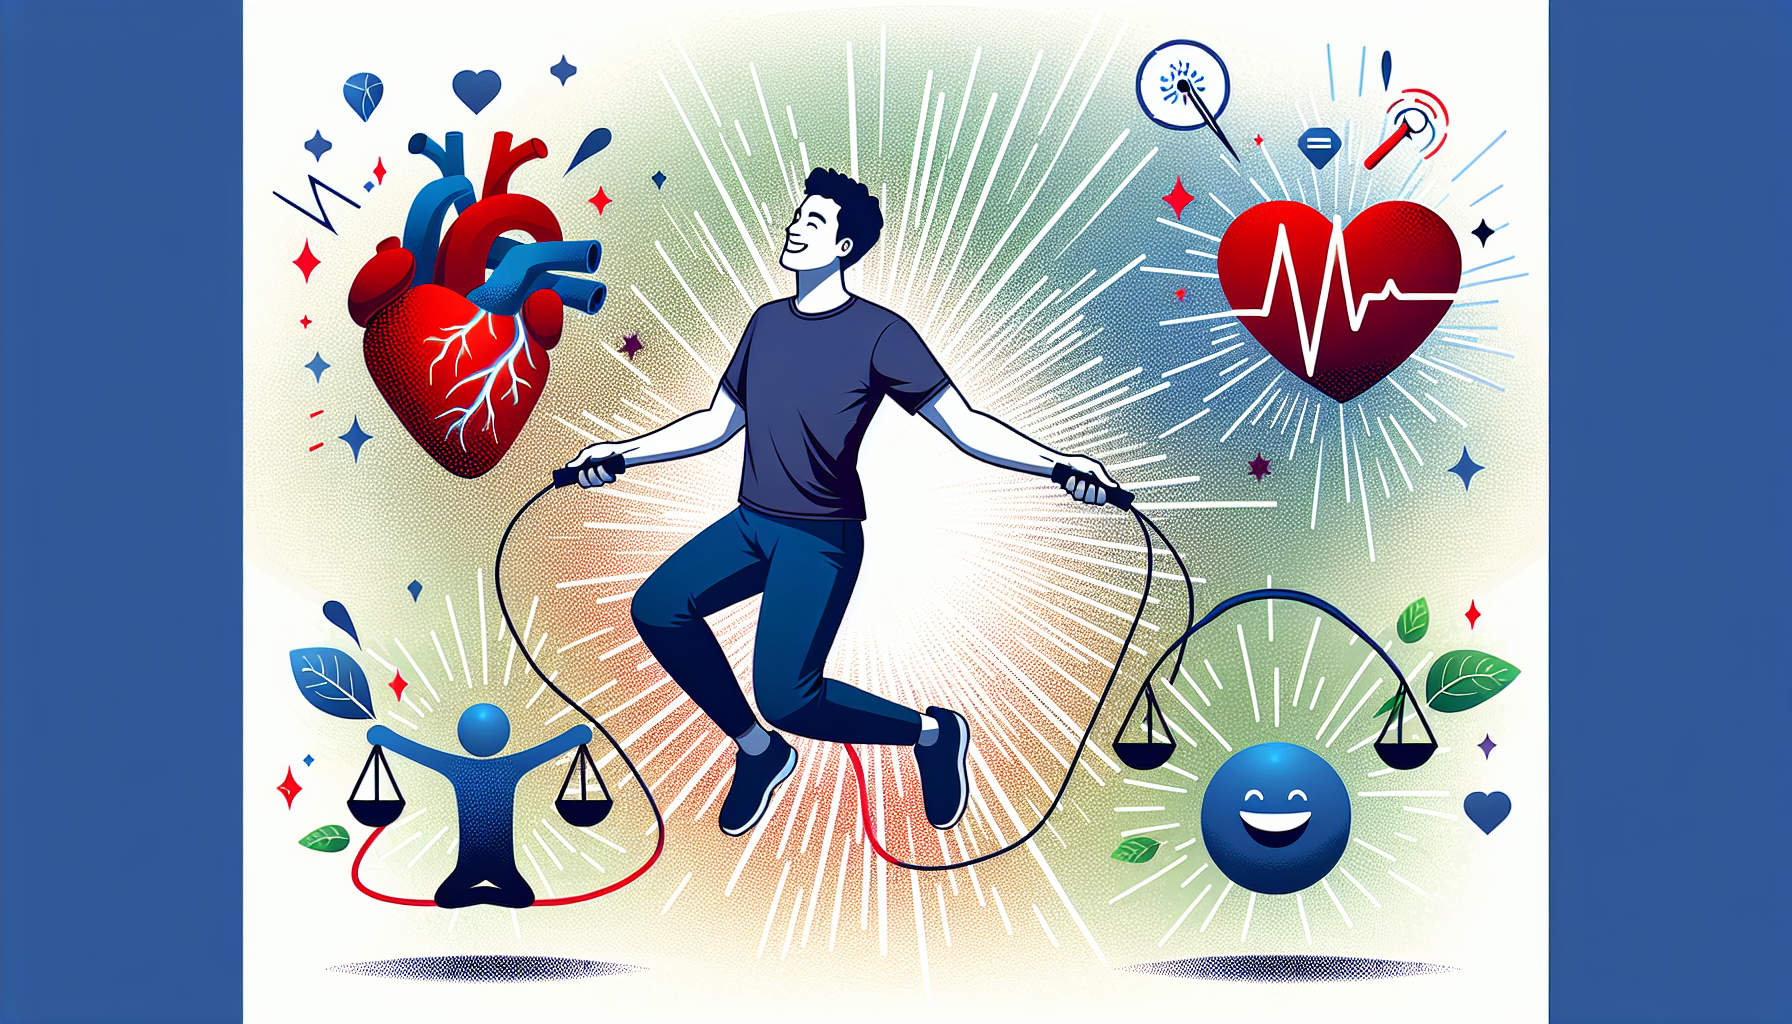 Cartoon illustration of a person doing jump rope workout with health-related symbols around